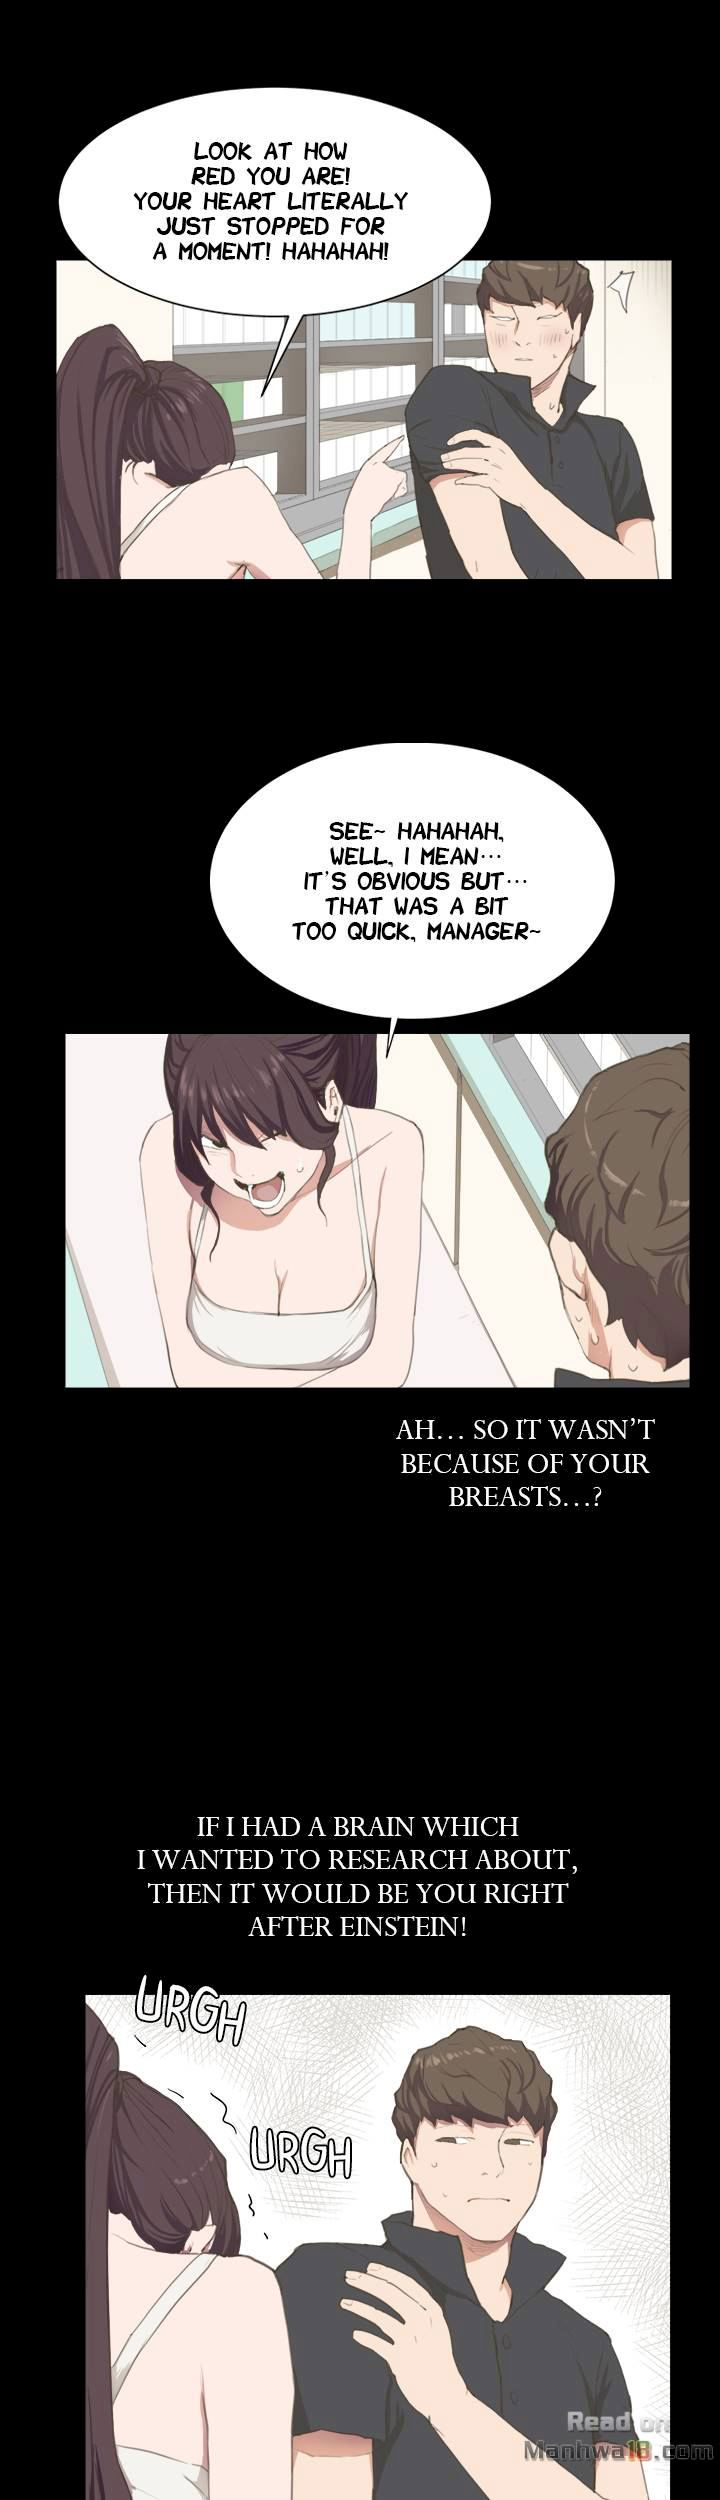 she8217s-too-much-for-me-chap-3-11